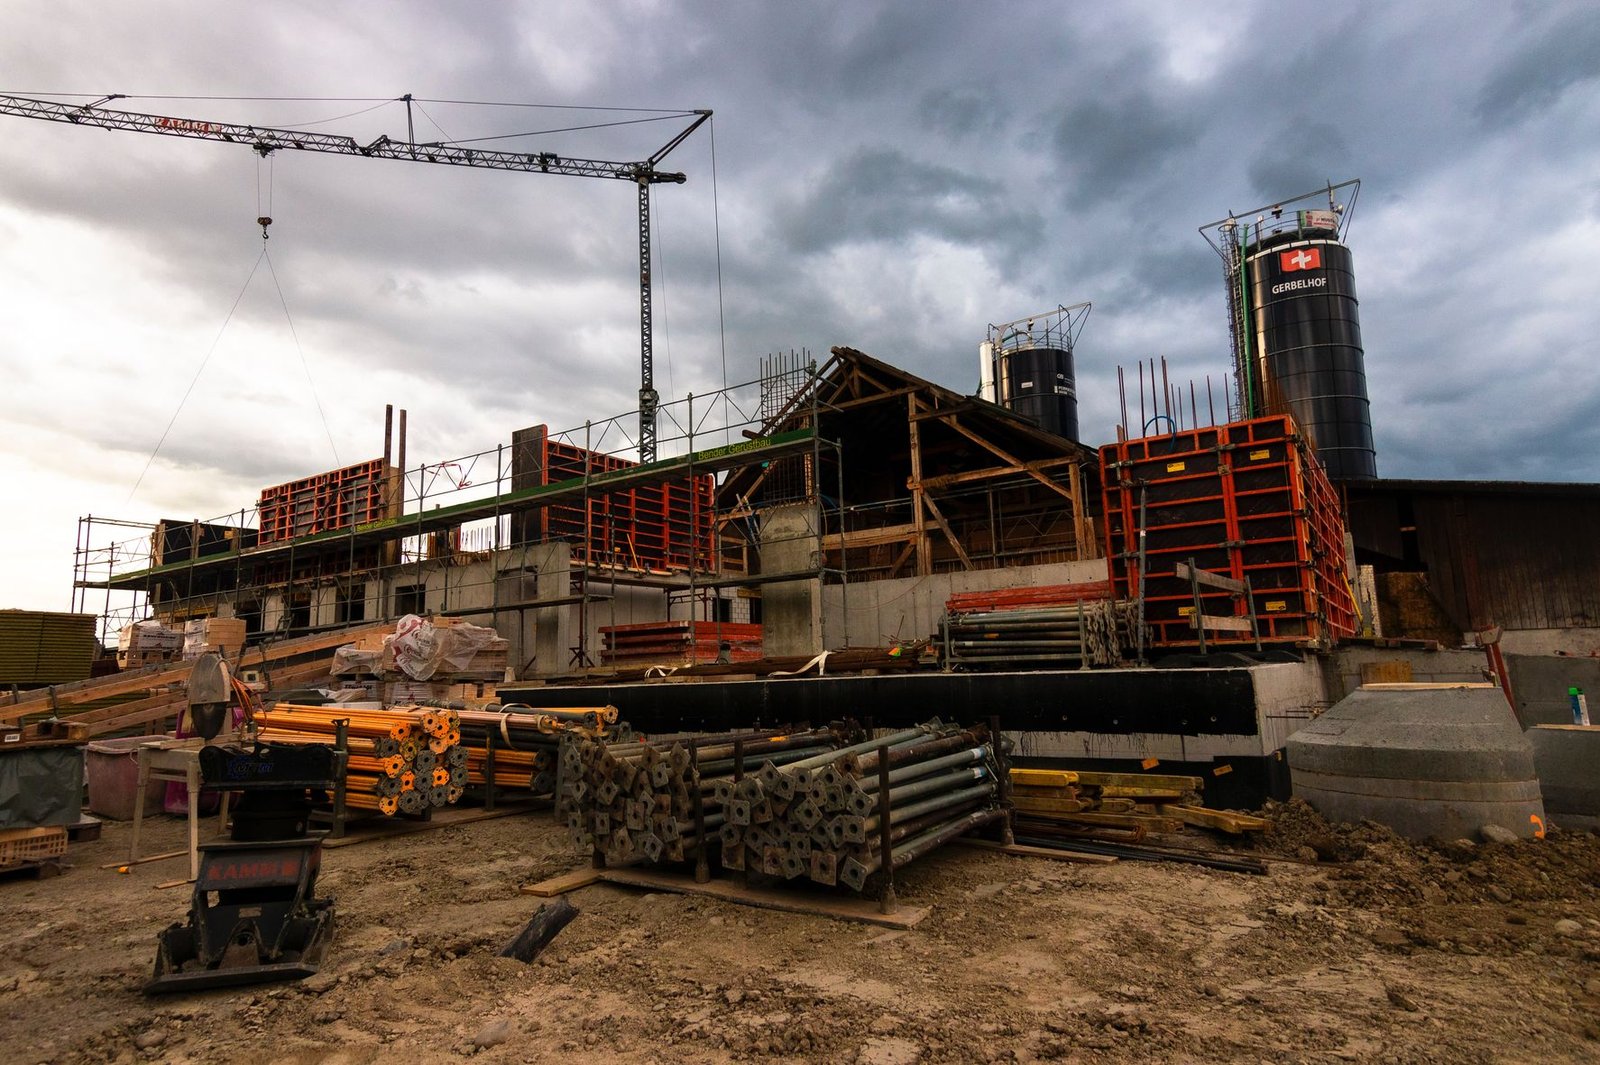 Construction materials become unaffordable for the average person as prices rise by 20%